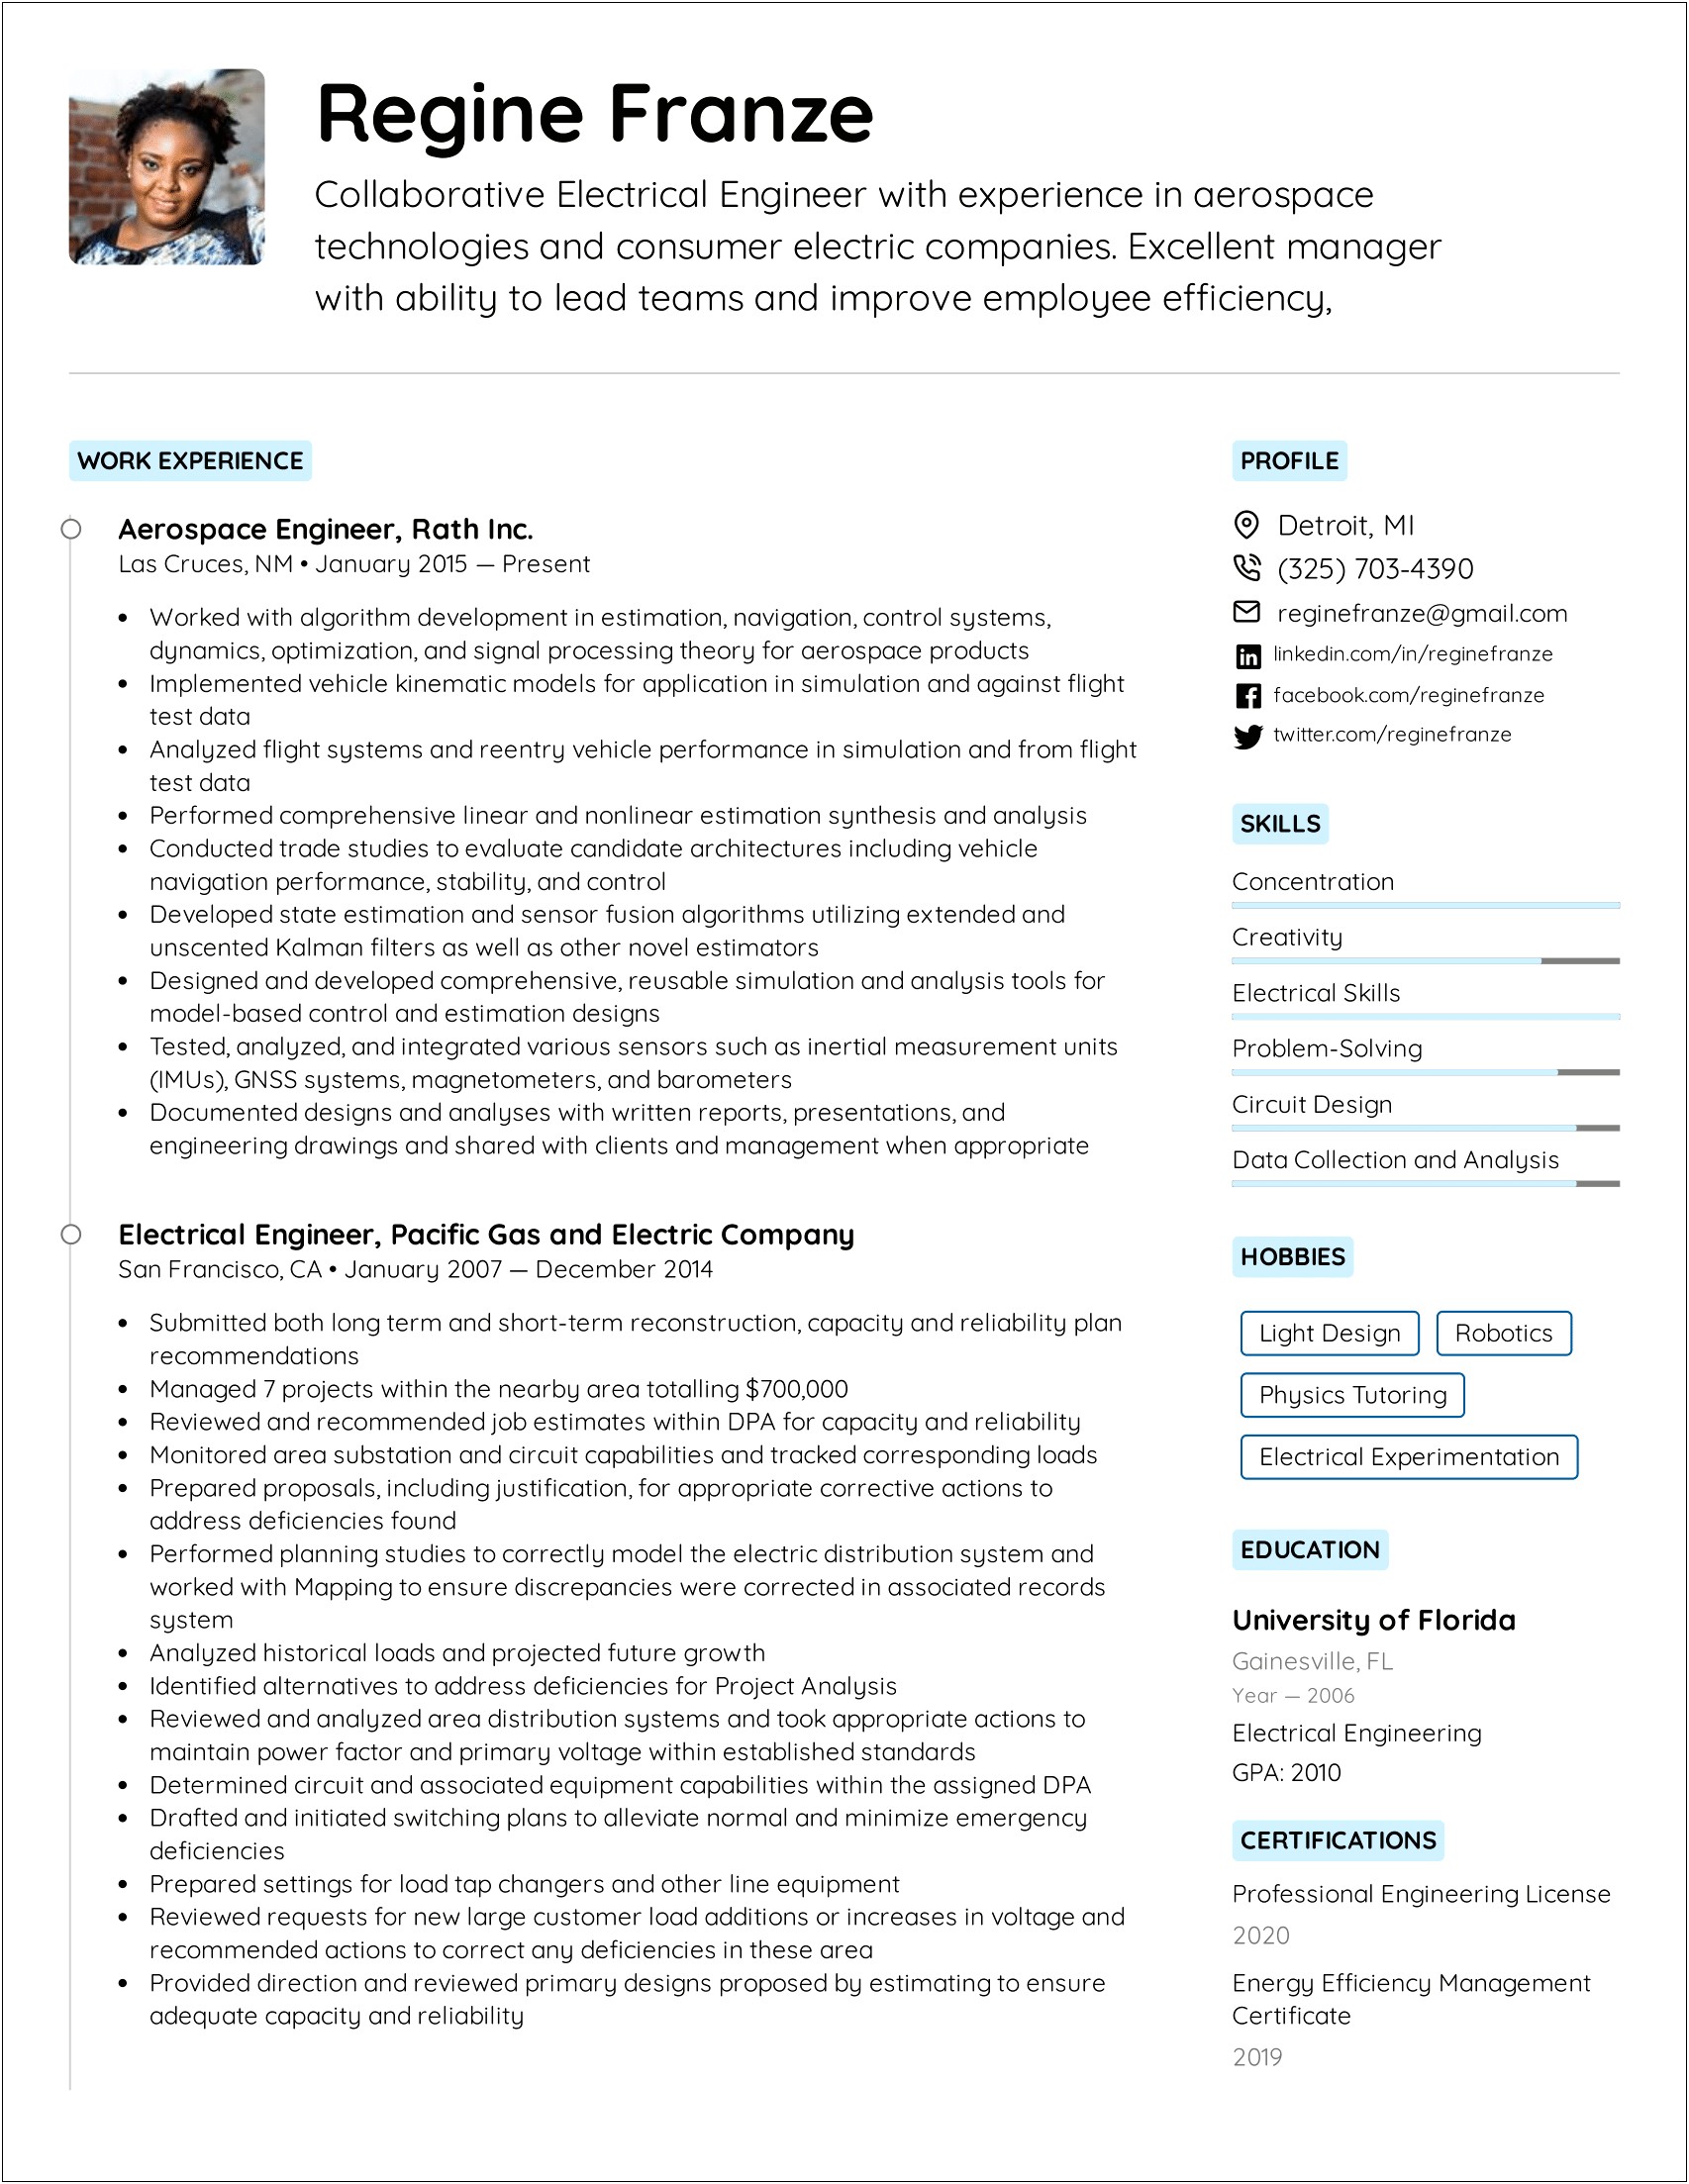 Resume Sample Strengths And Weaknesses